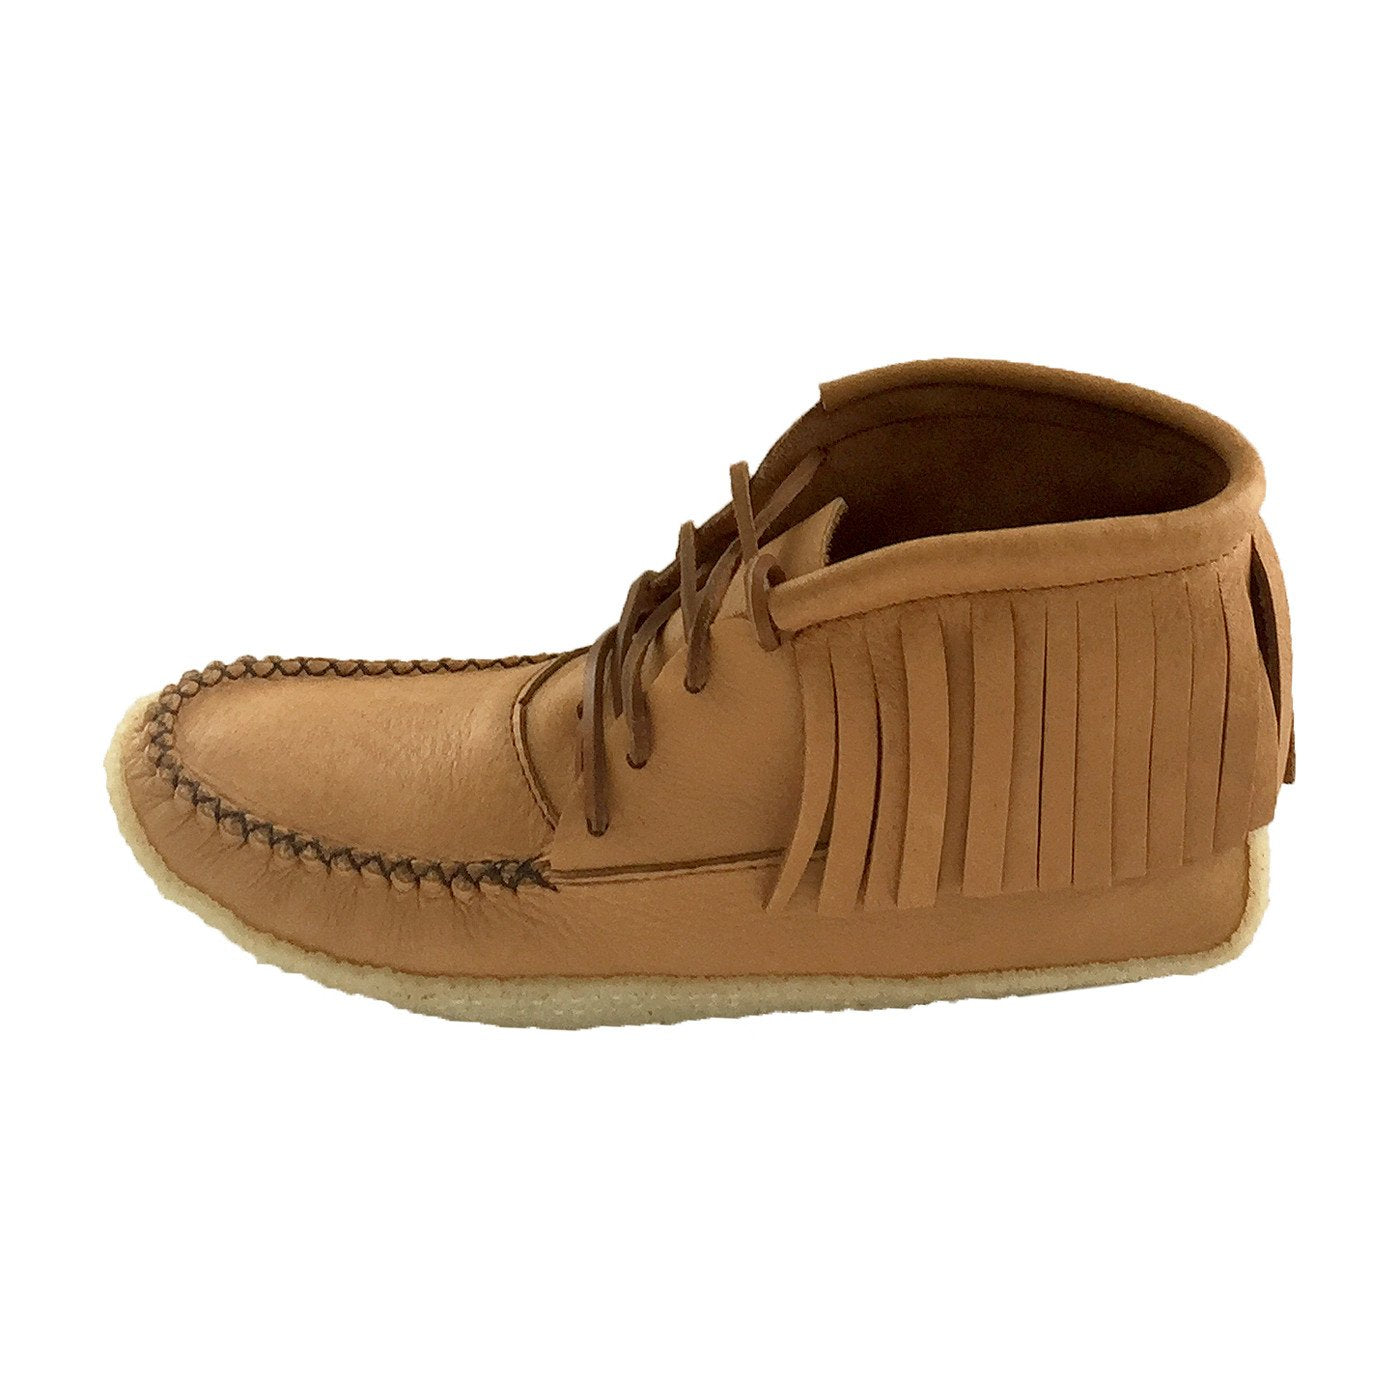 Men's Fringed Ankle Moccasin Boots